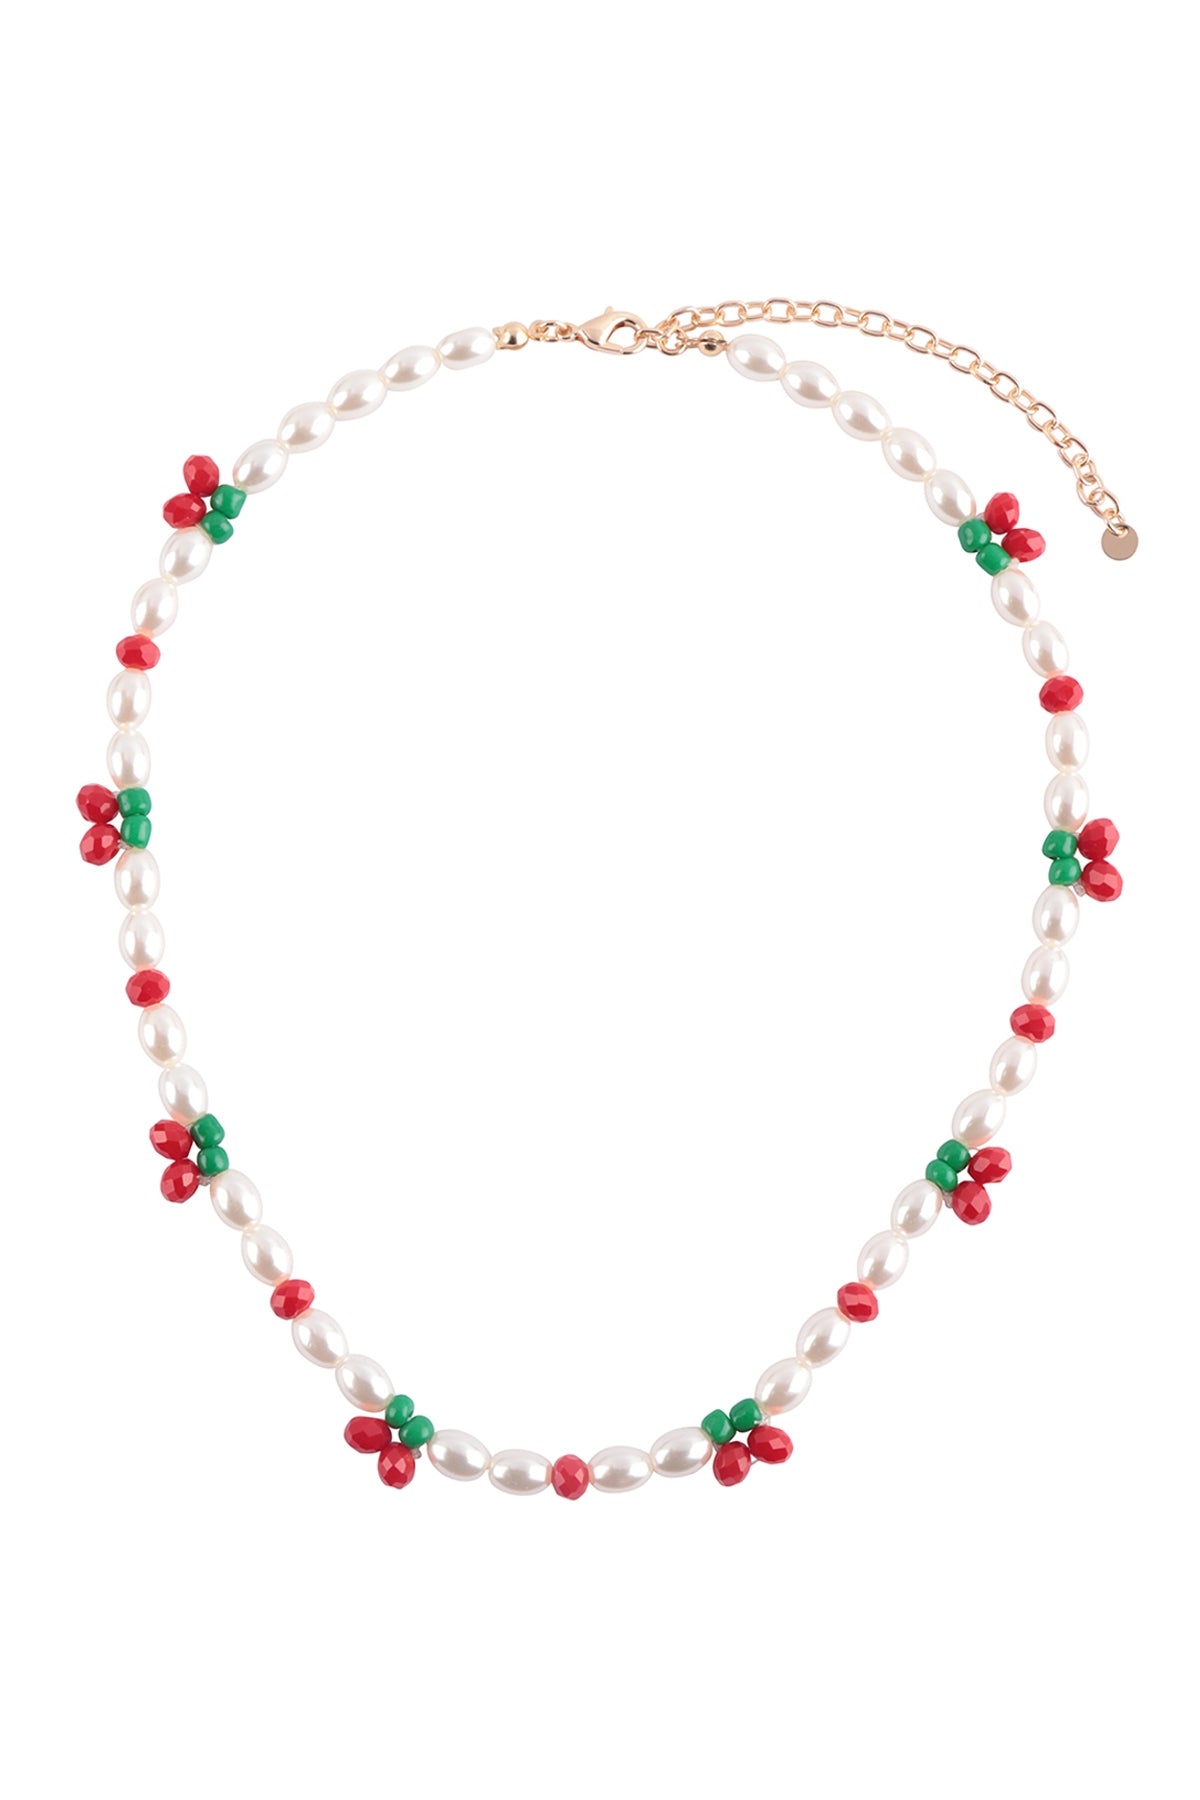 CHERRY & PEARL BEADED NECKLACE